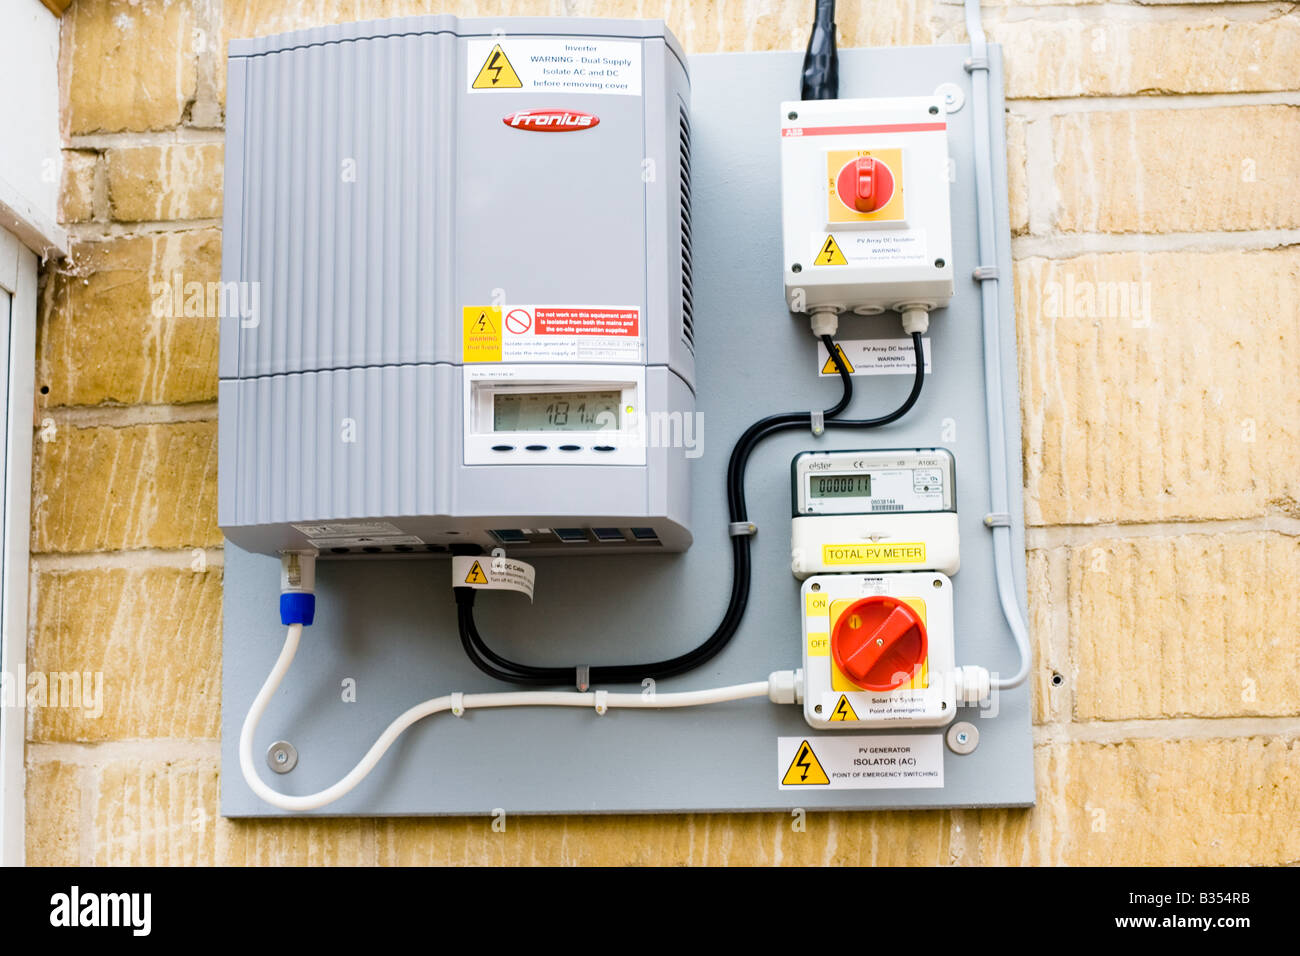 Wall mounted Fronius inverter to control array of 12 solar PV panels  Cotswolds UK Stock Photo - Alamy